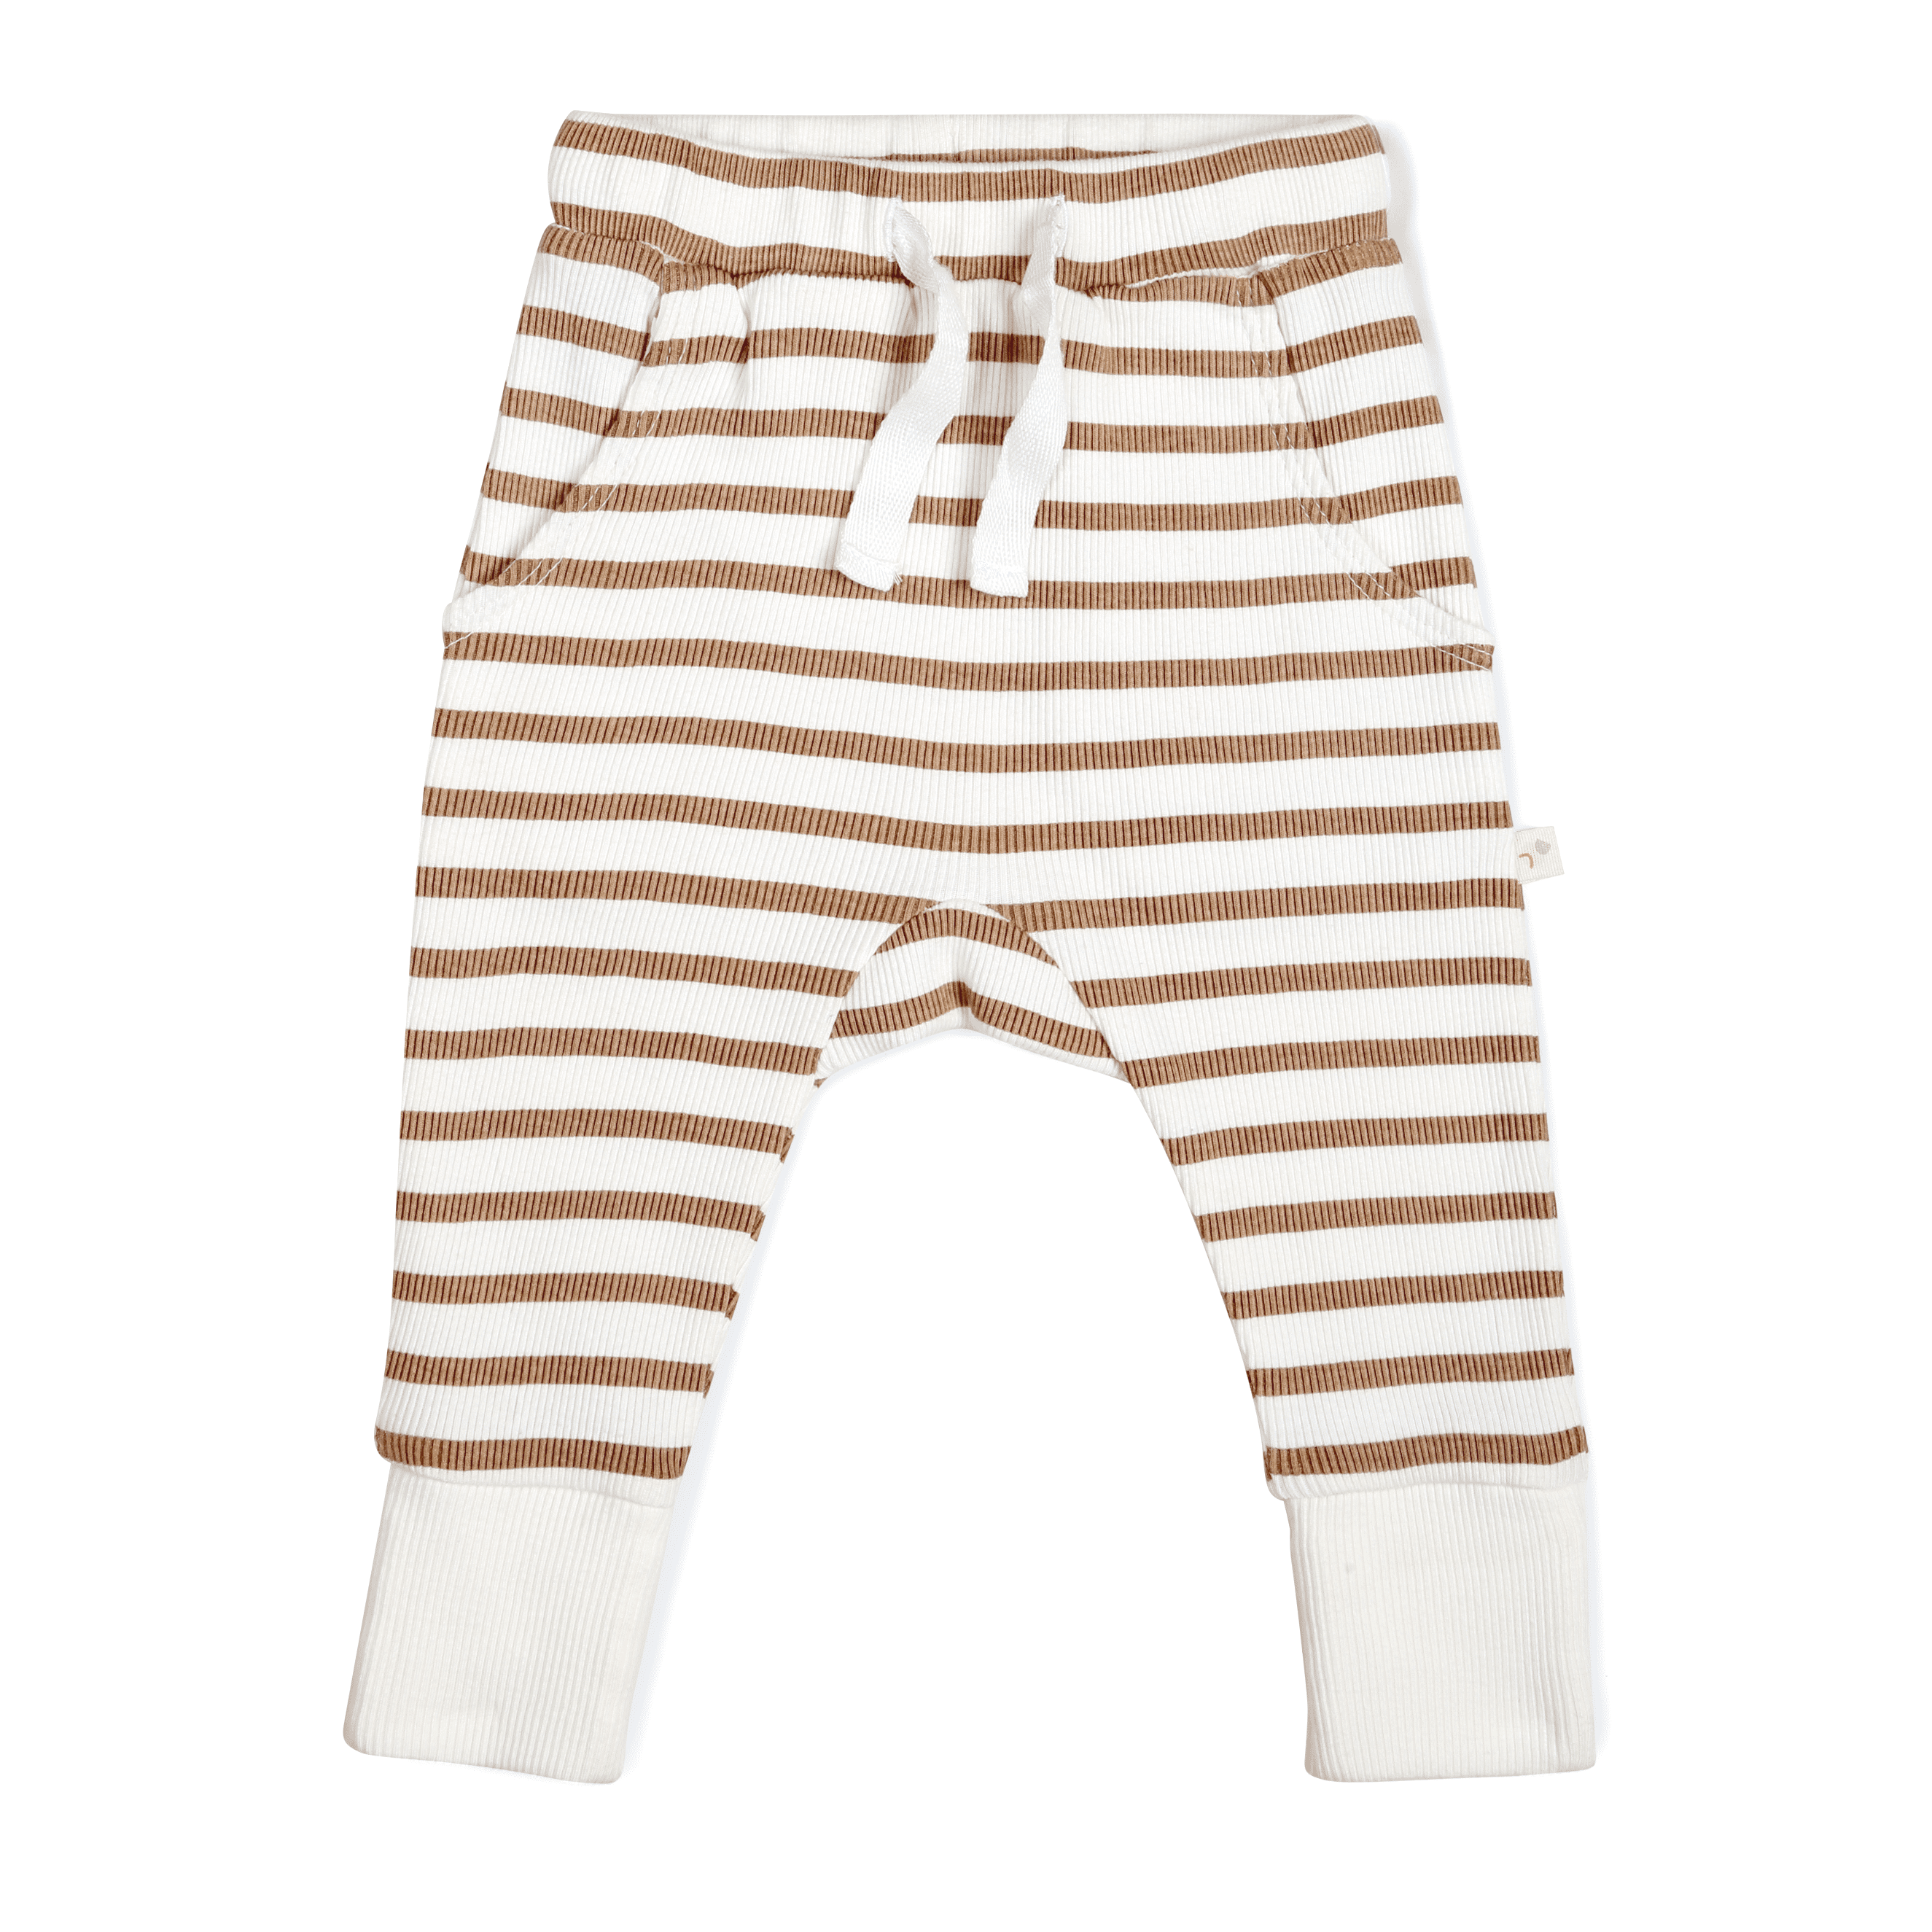 Organic Harem Pants - Stripes by Makemake Organics, in brown and white stripes with a drawstring waist and white cuffs, displayed flat against a white background.